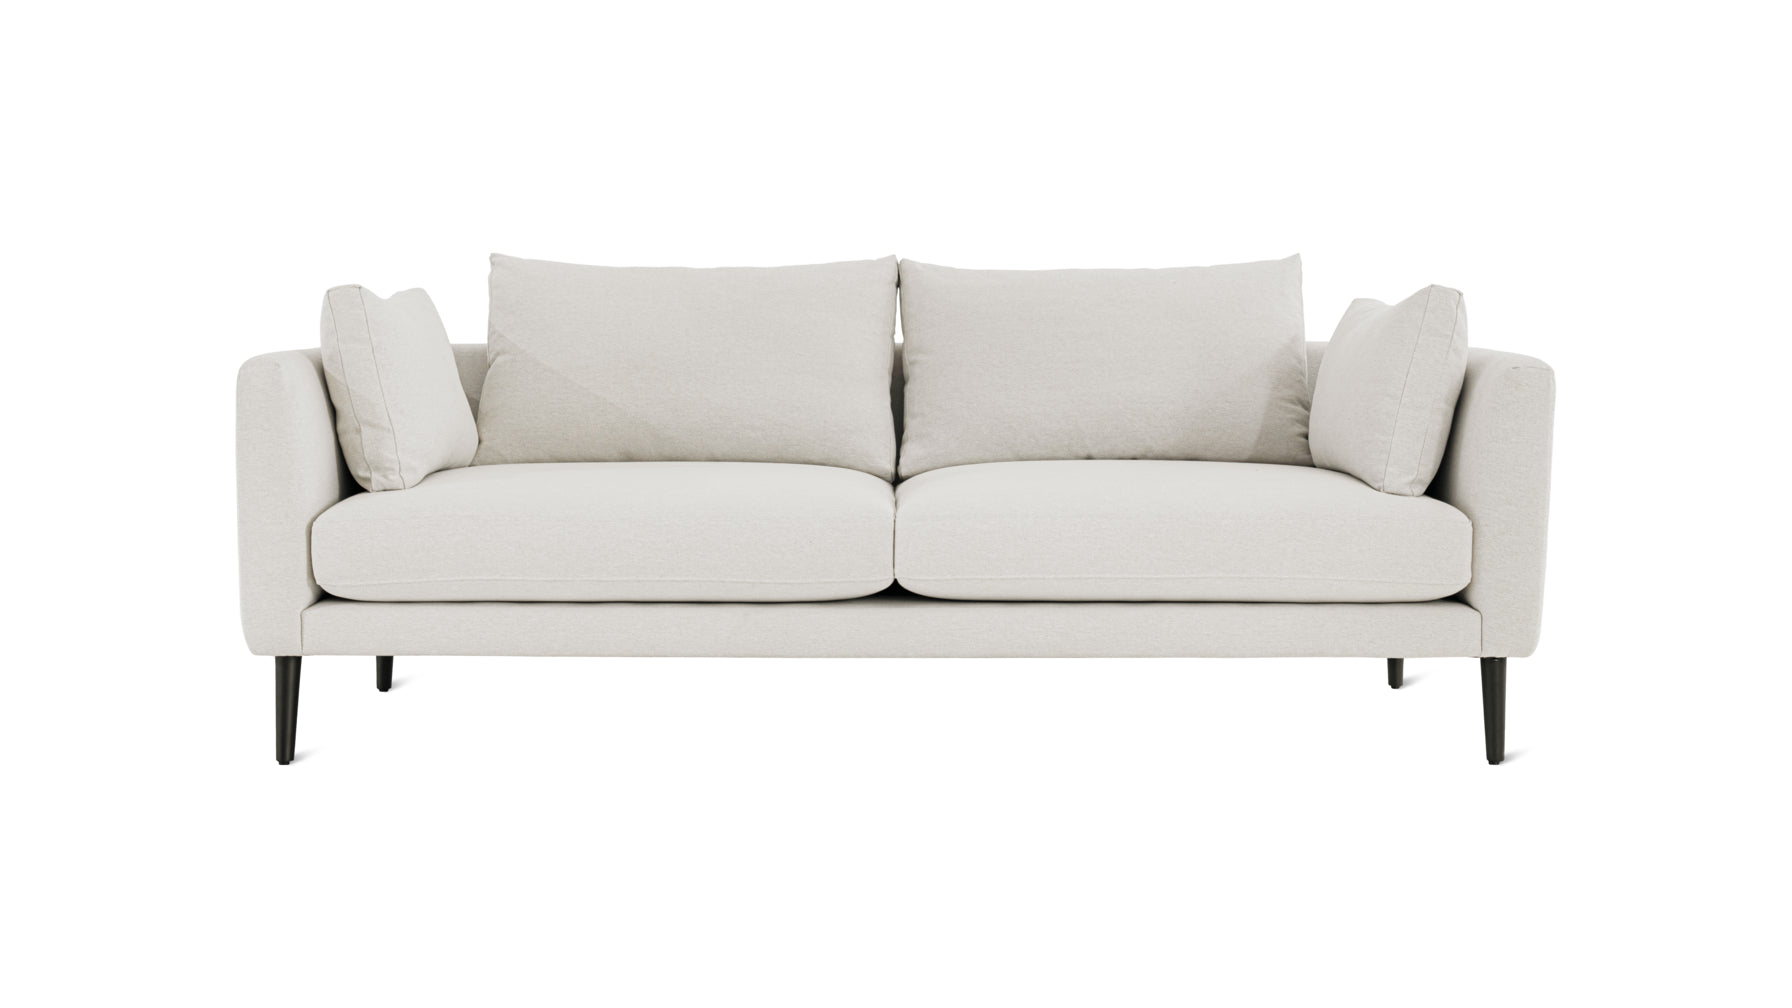 Stay A While Sofa, 3+ Seater, Coconut - Image 1